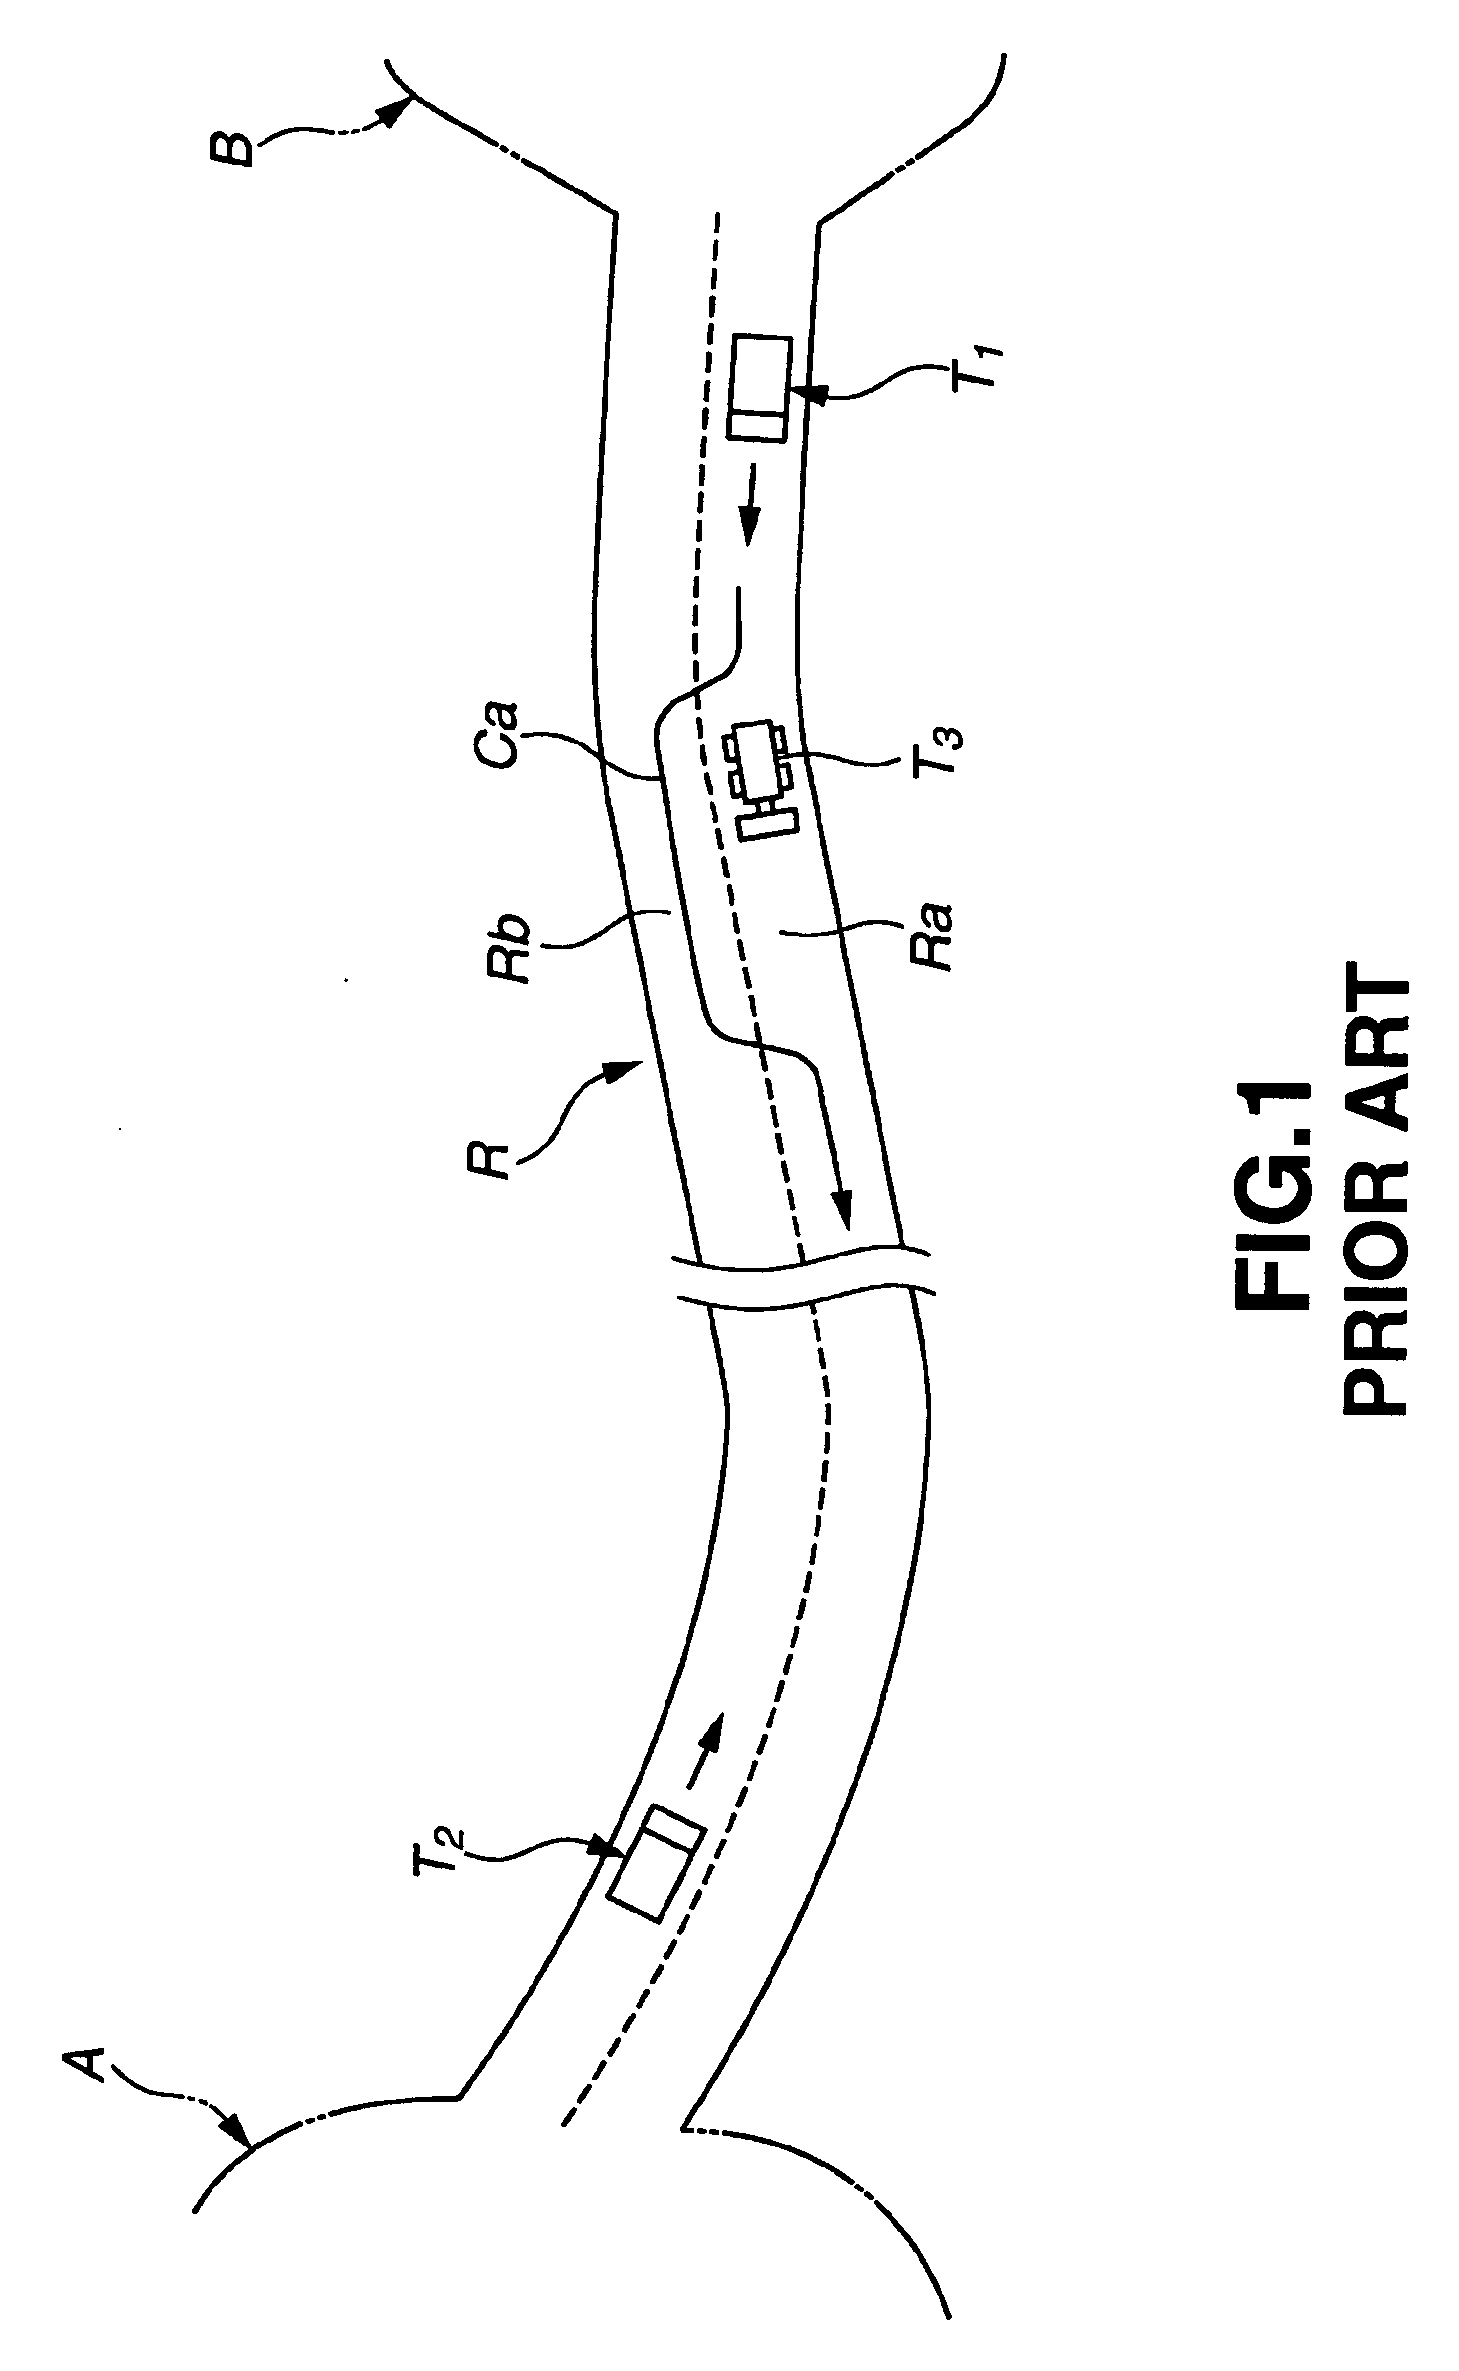 Travel control device and method for vehicles